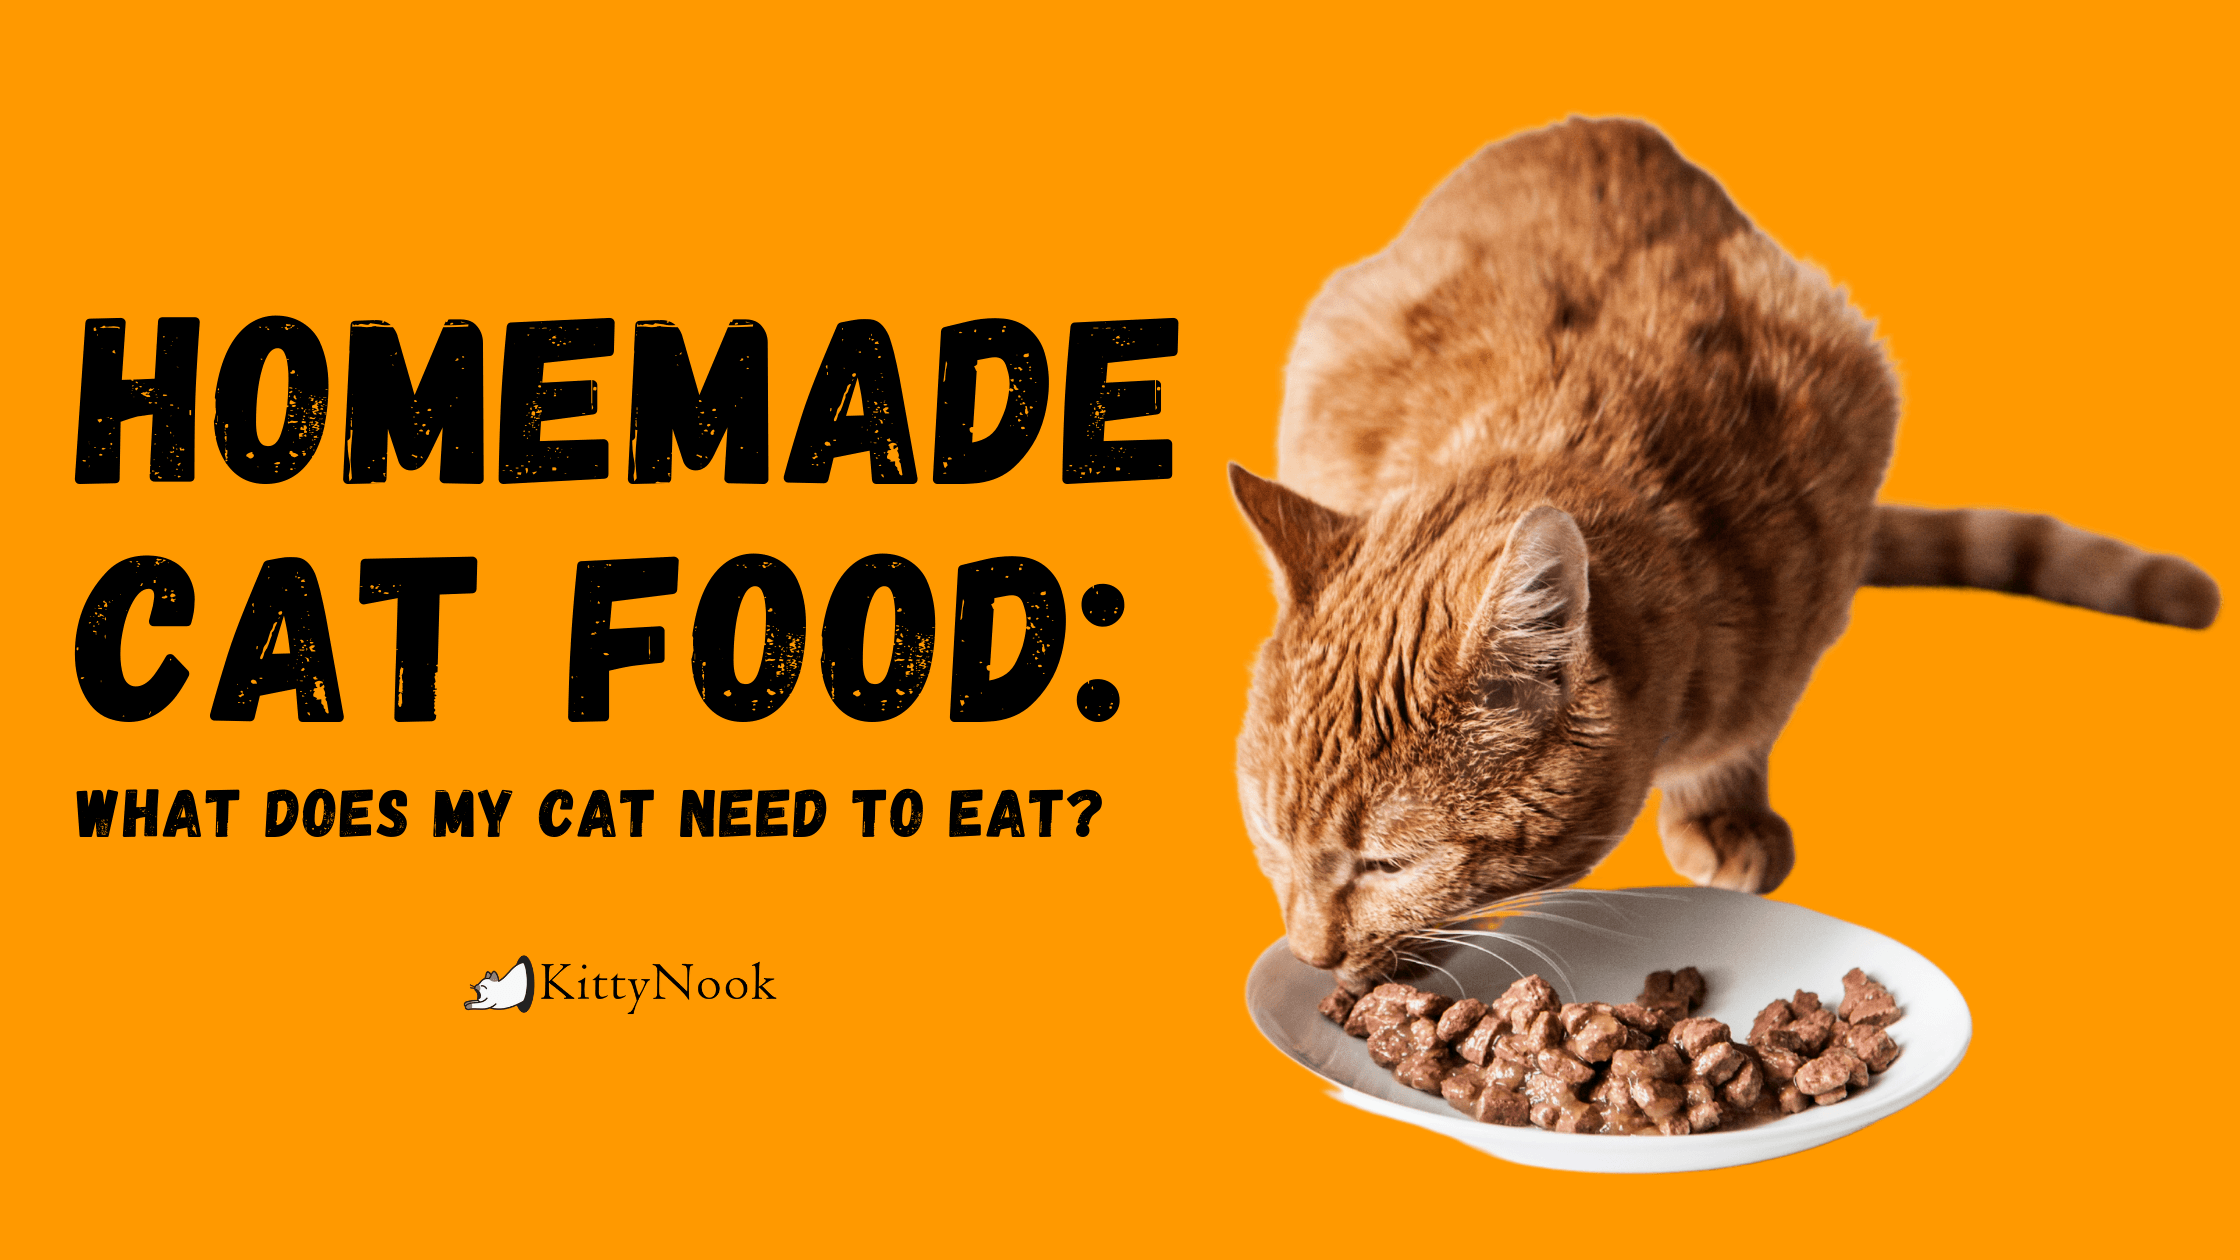 homemade cat food text in yellow background